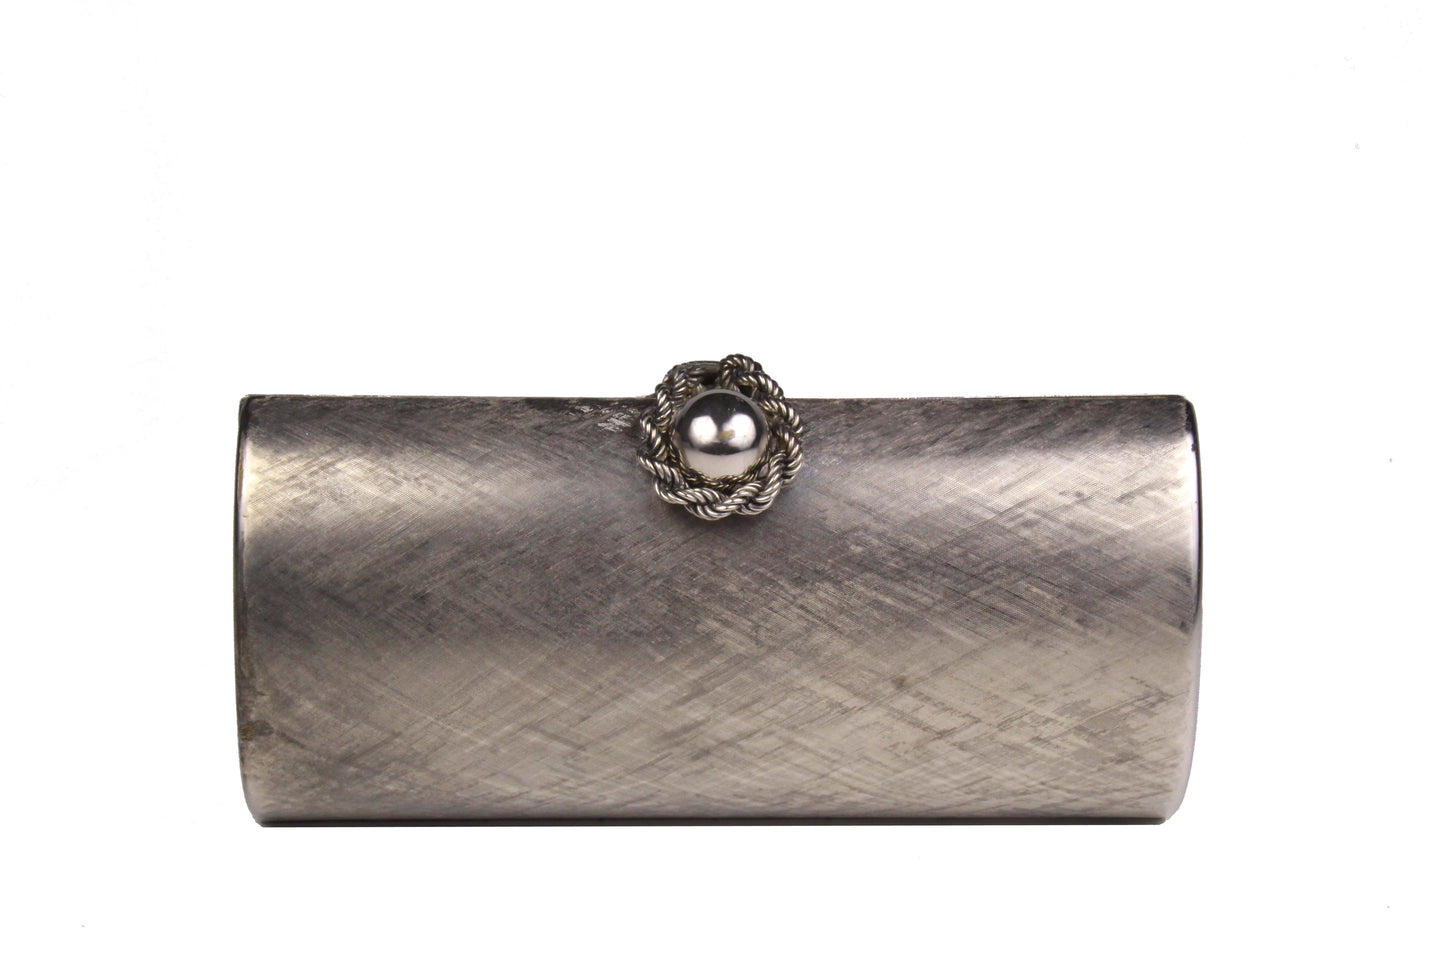 RODO brushed aged silver clutch purse